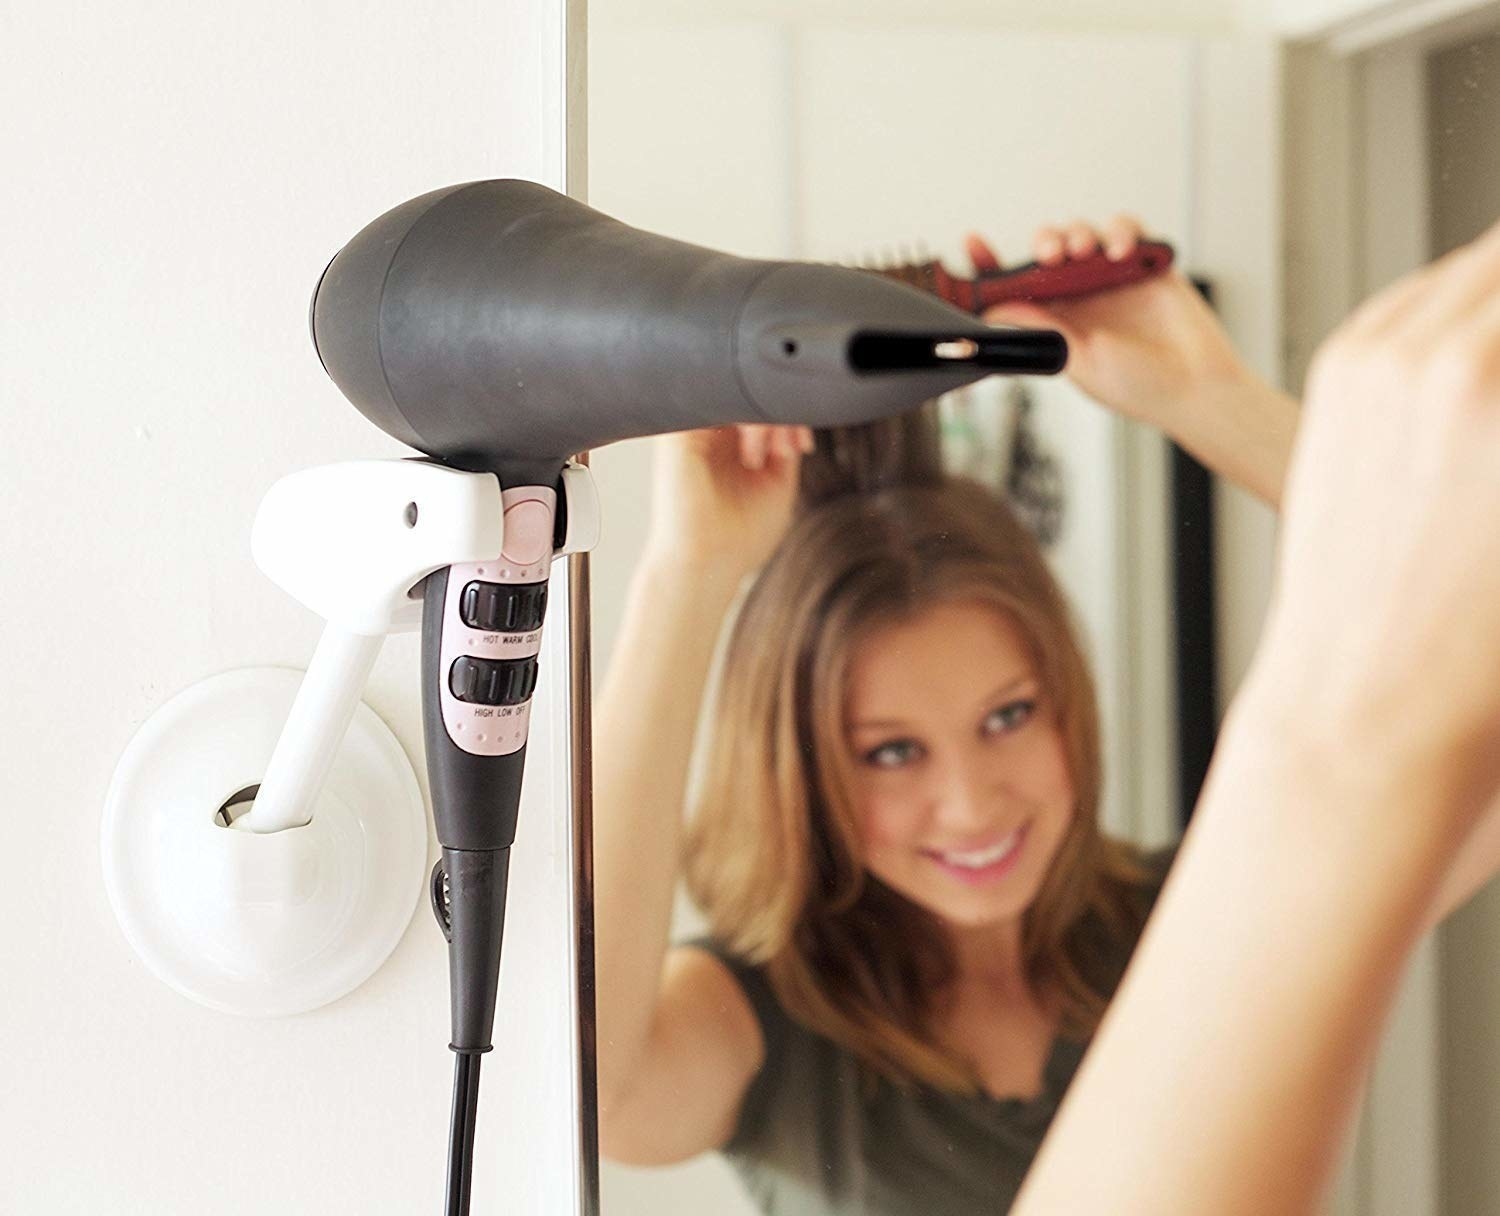 person blow drying hair with a dryer placed in the holder